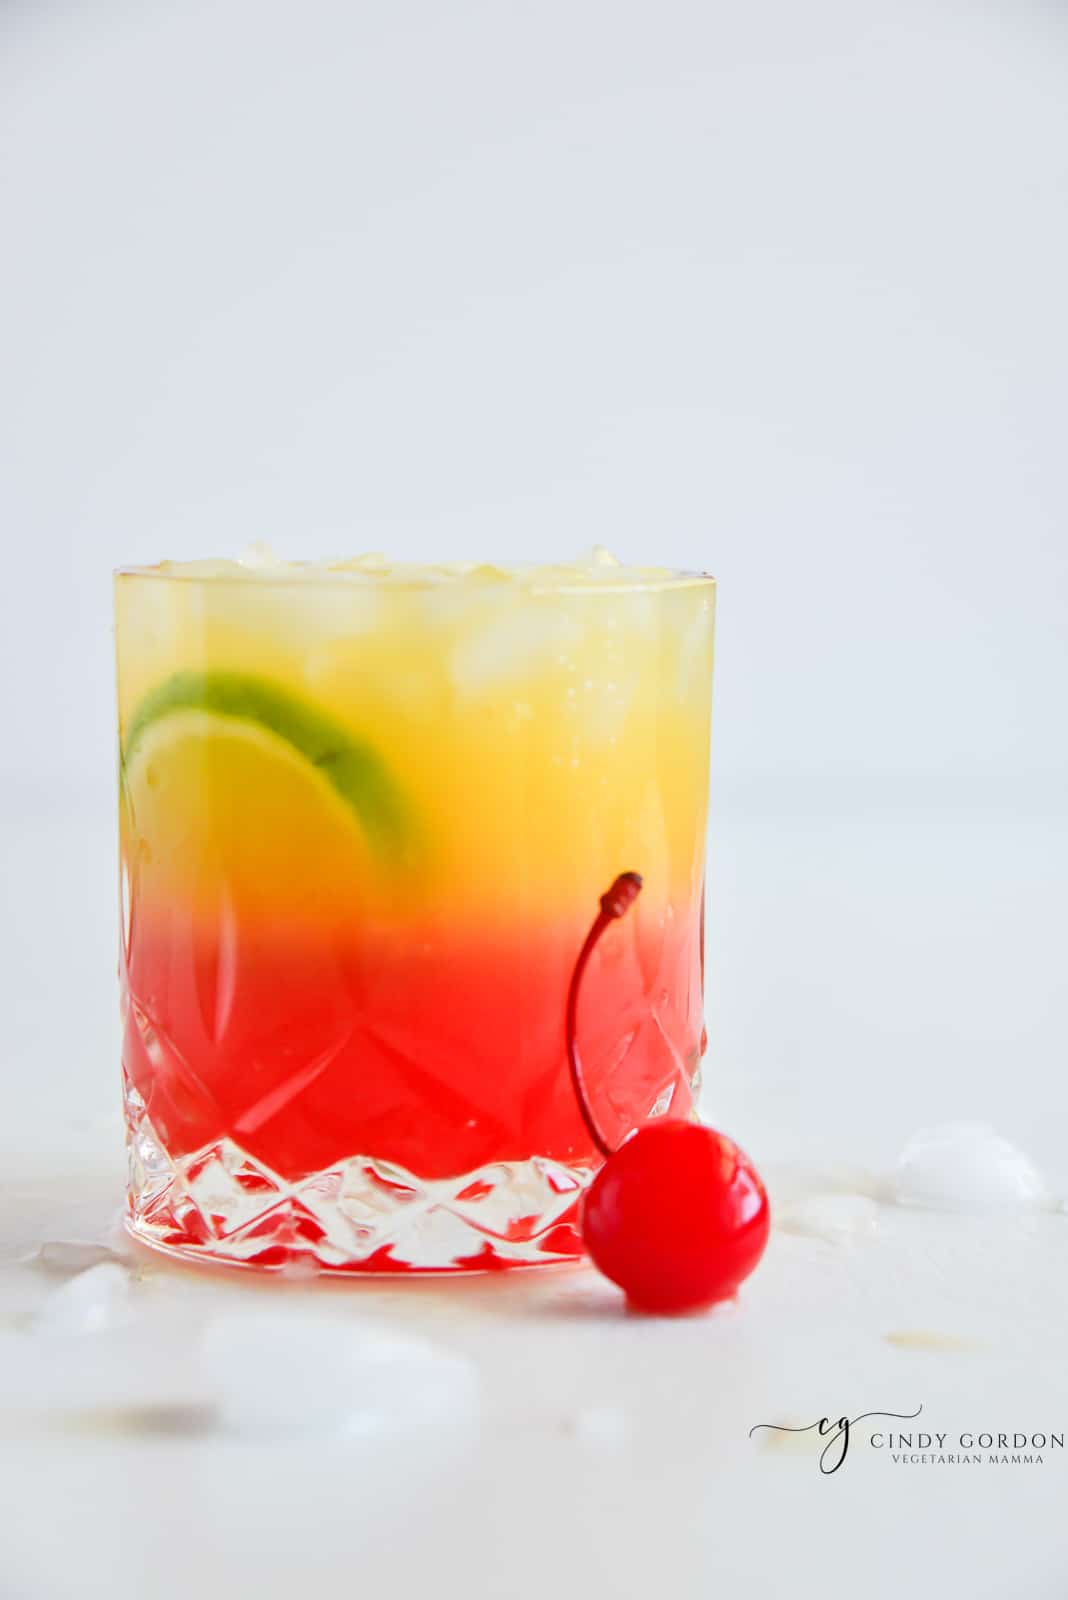 a highball glass with a layered red and yellow malibu sunset drink. Garnished with a cherry and lime slices.